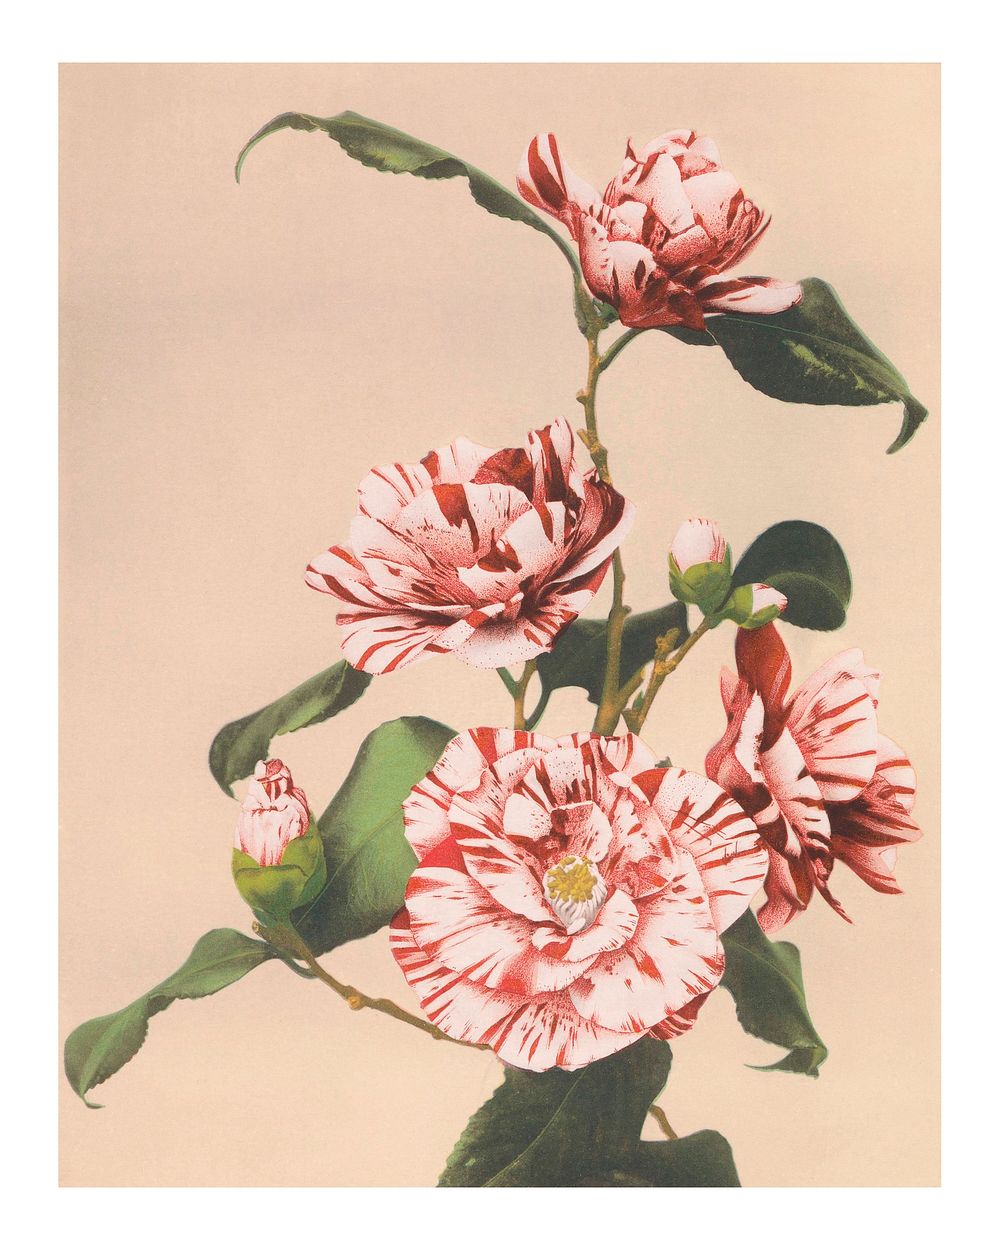 Vintage striped camellias wall art print and poster design remix from the original artwork.